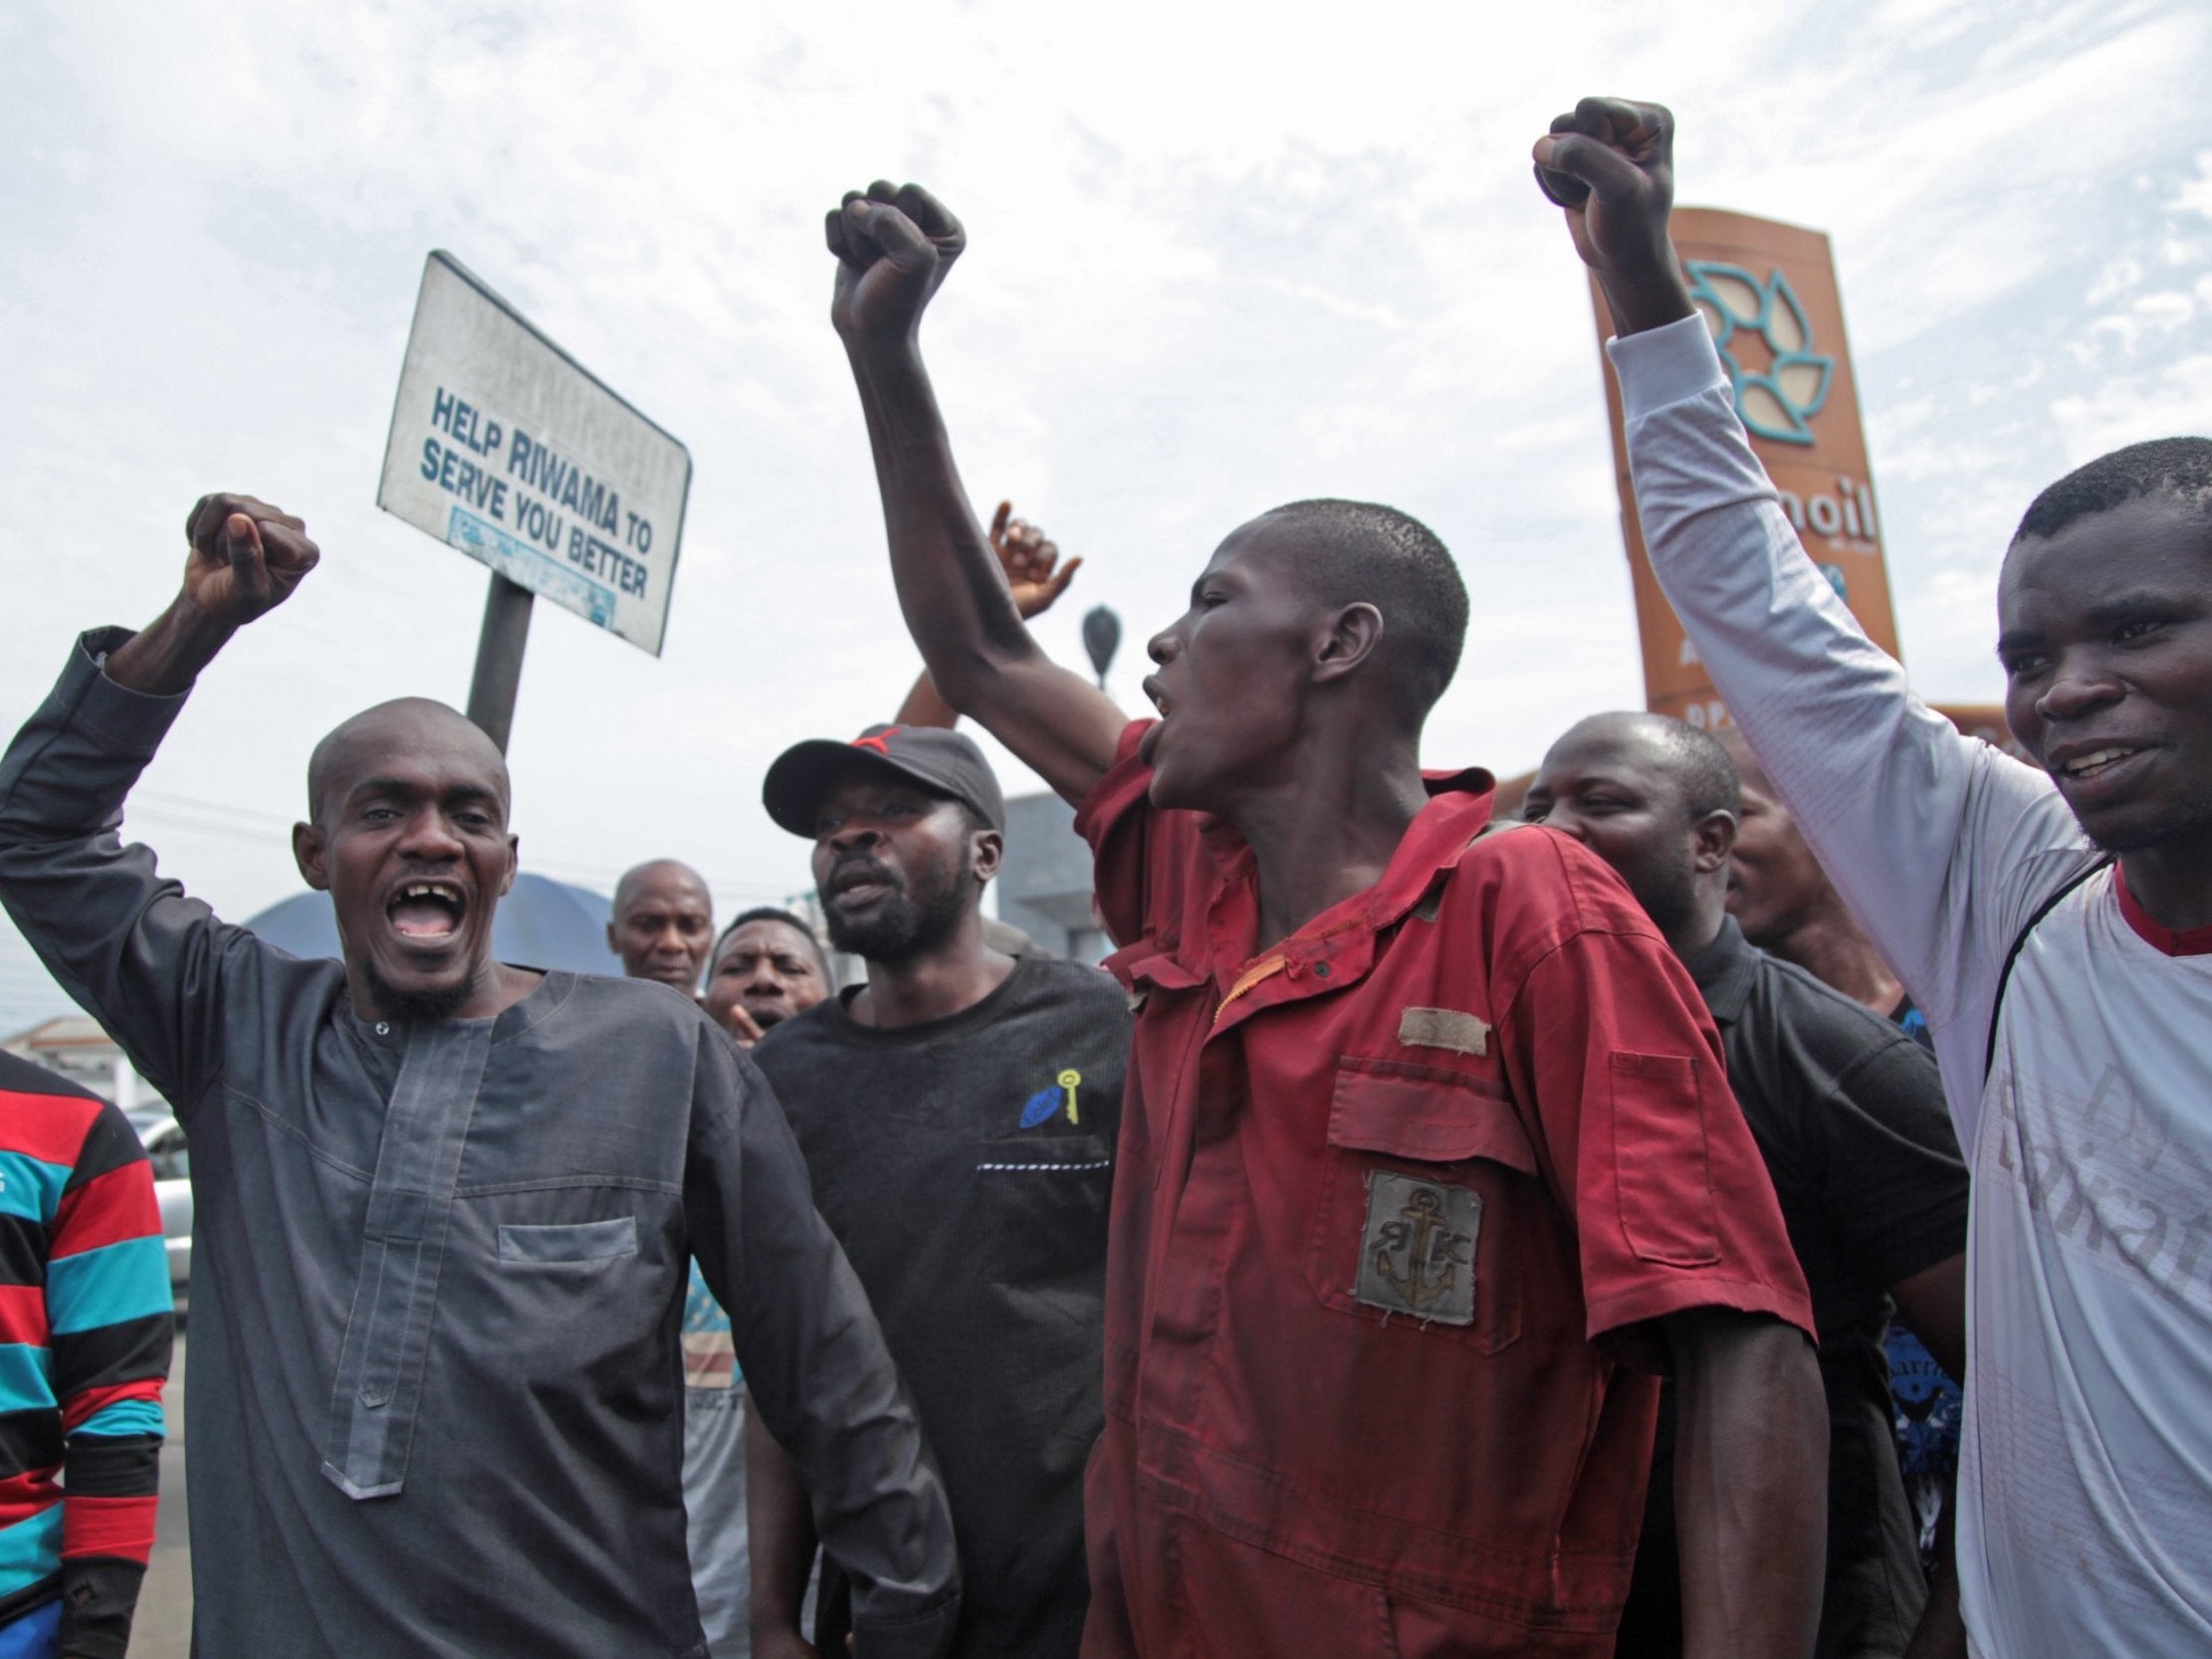 Protesters in Port Harcourt demonstrate against the result of Nigeria's presidential election